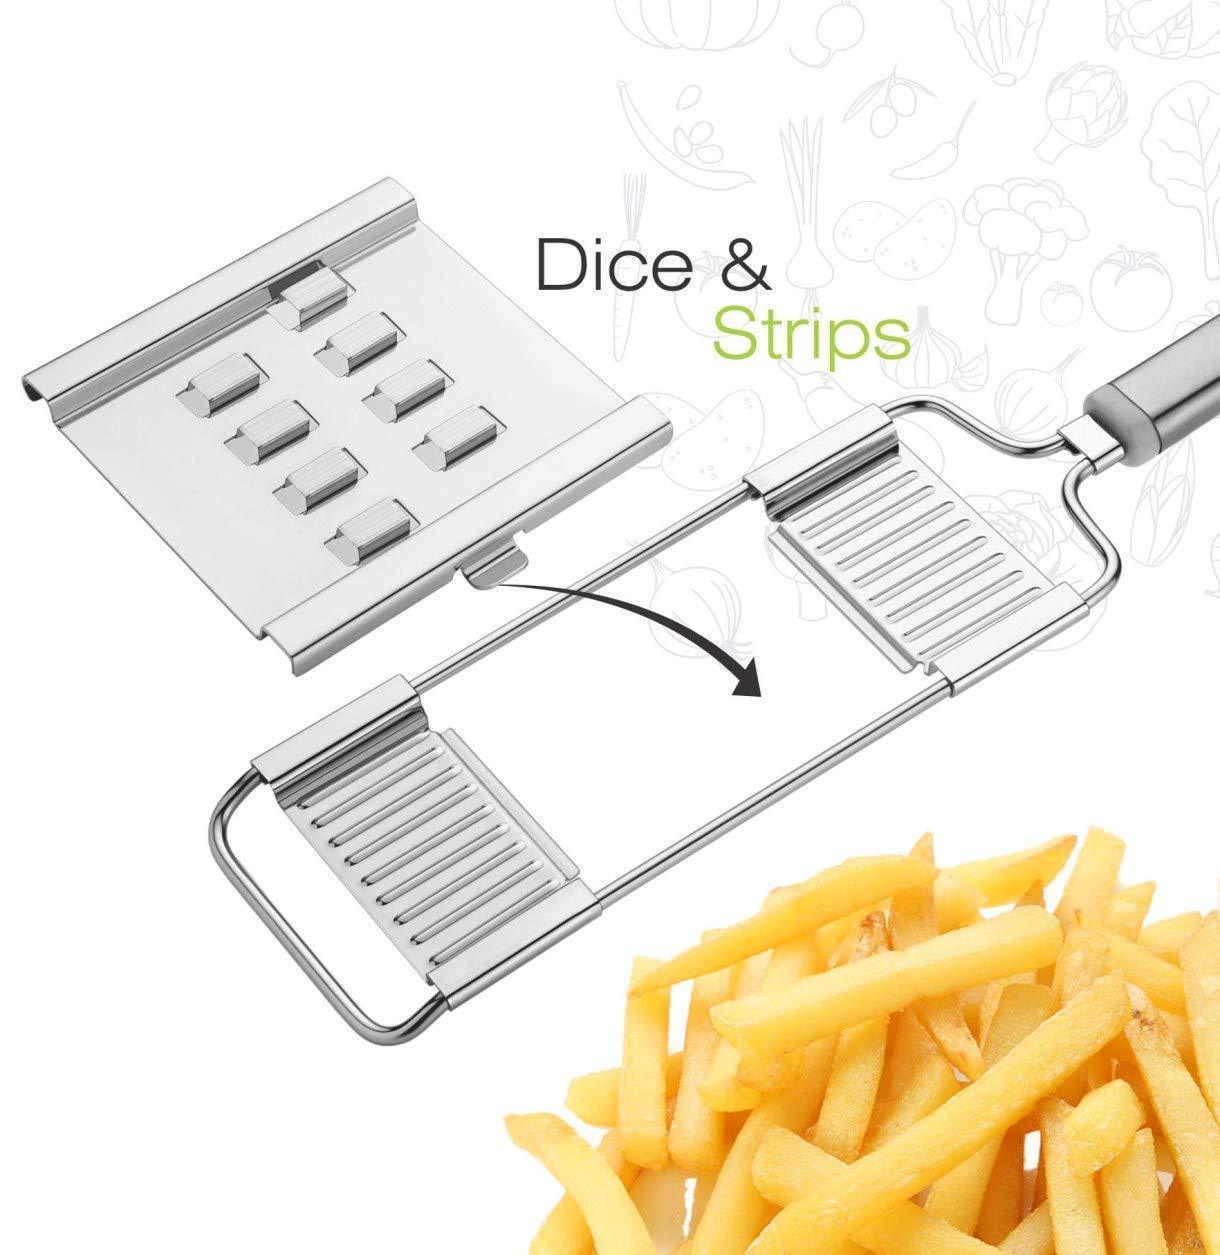 6 In 1 Multipurpose Stainless Steel Vegetable, French Fries Cutter, Slicer Graters